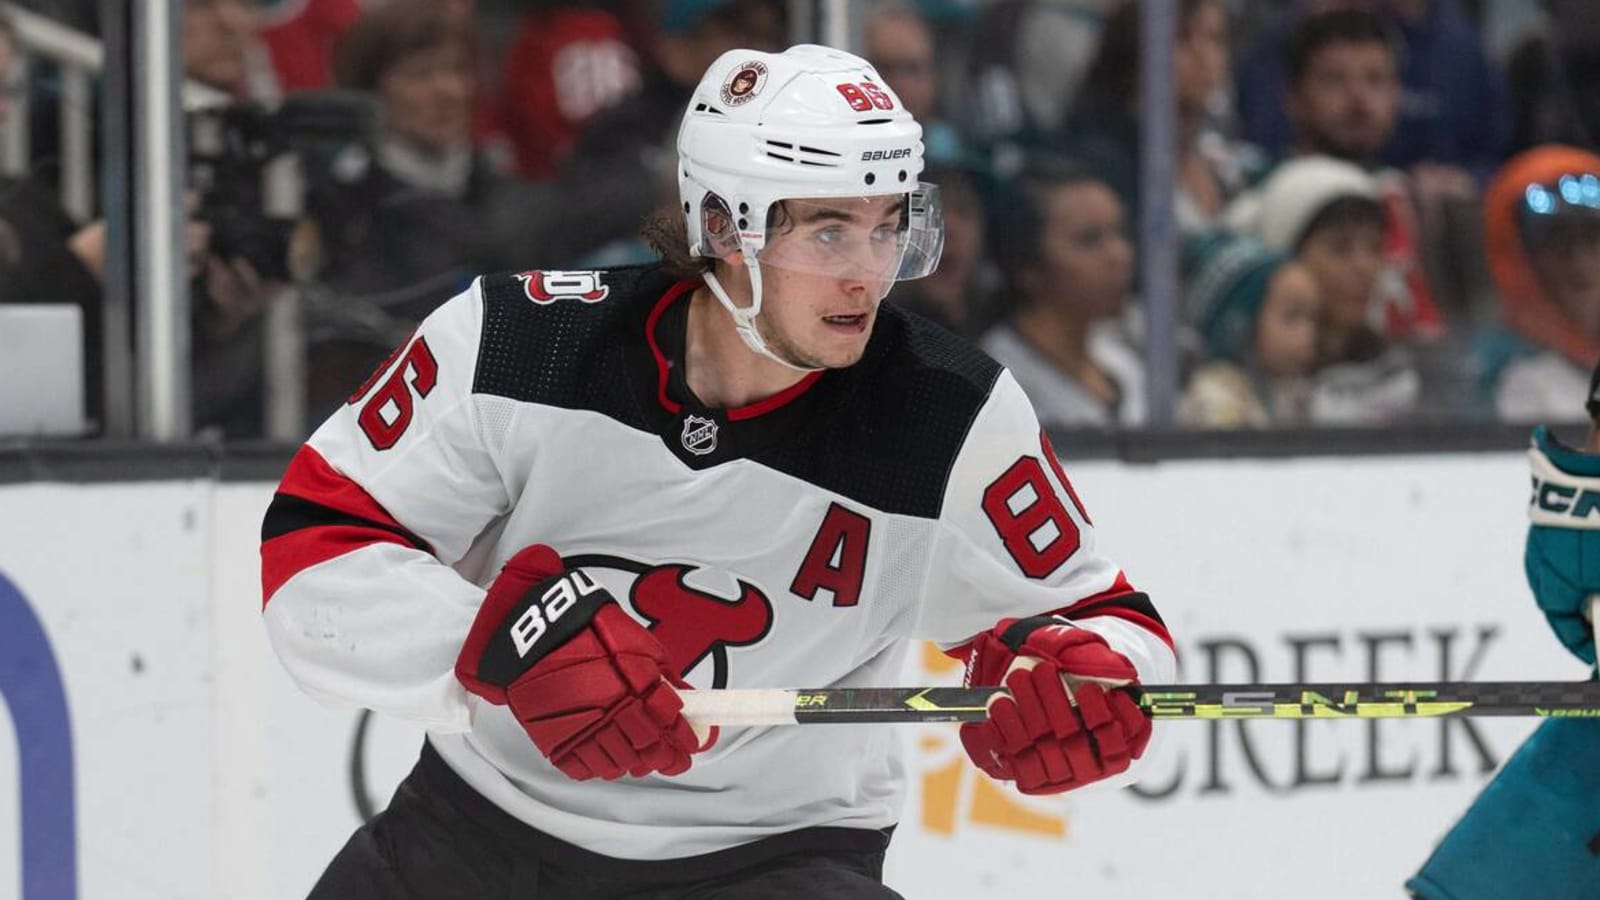 Devils All-Star Jack Hughes out with upper-body injury - NBC Sports